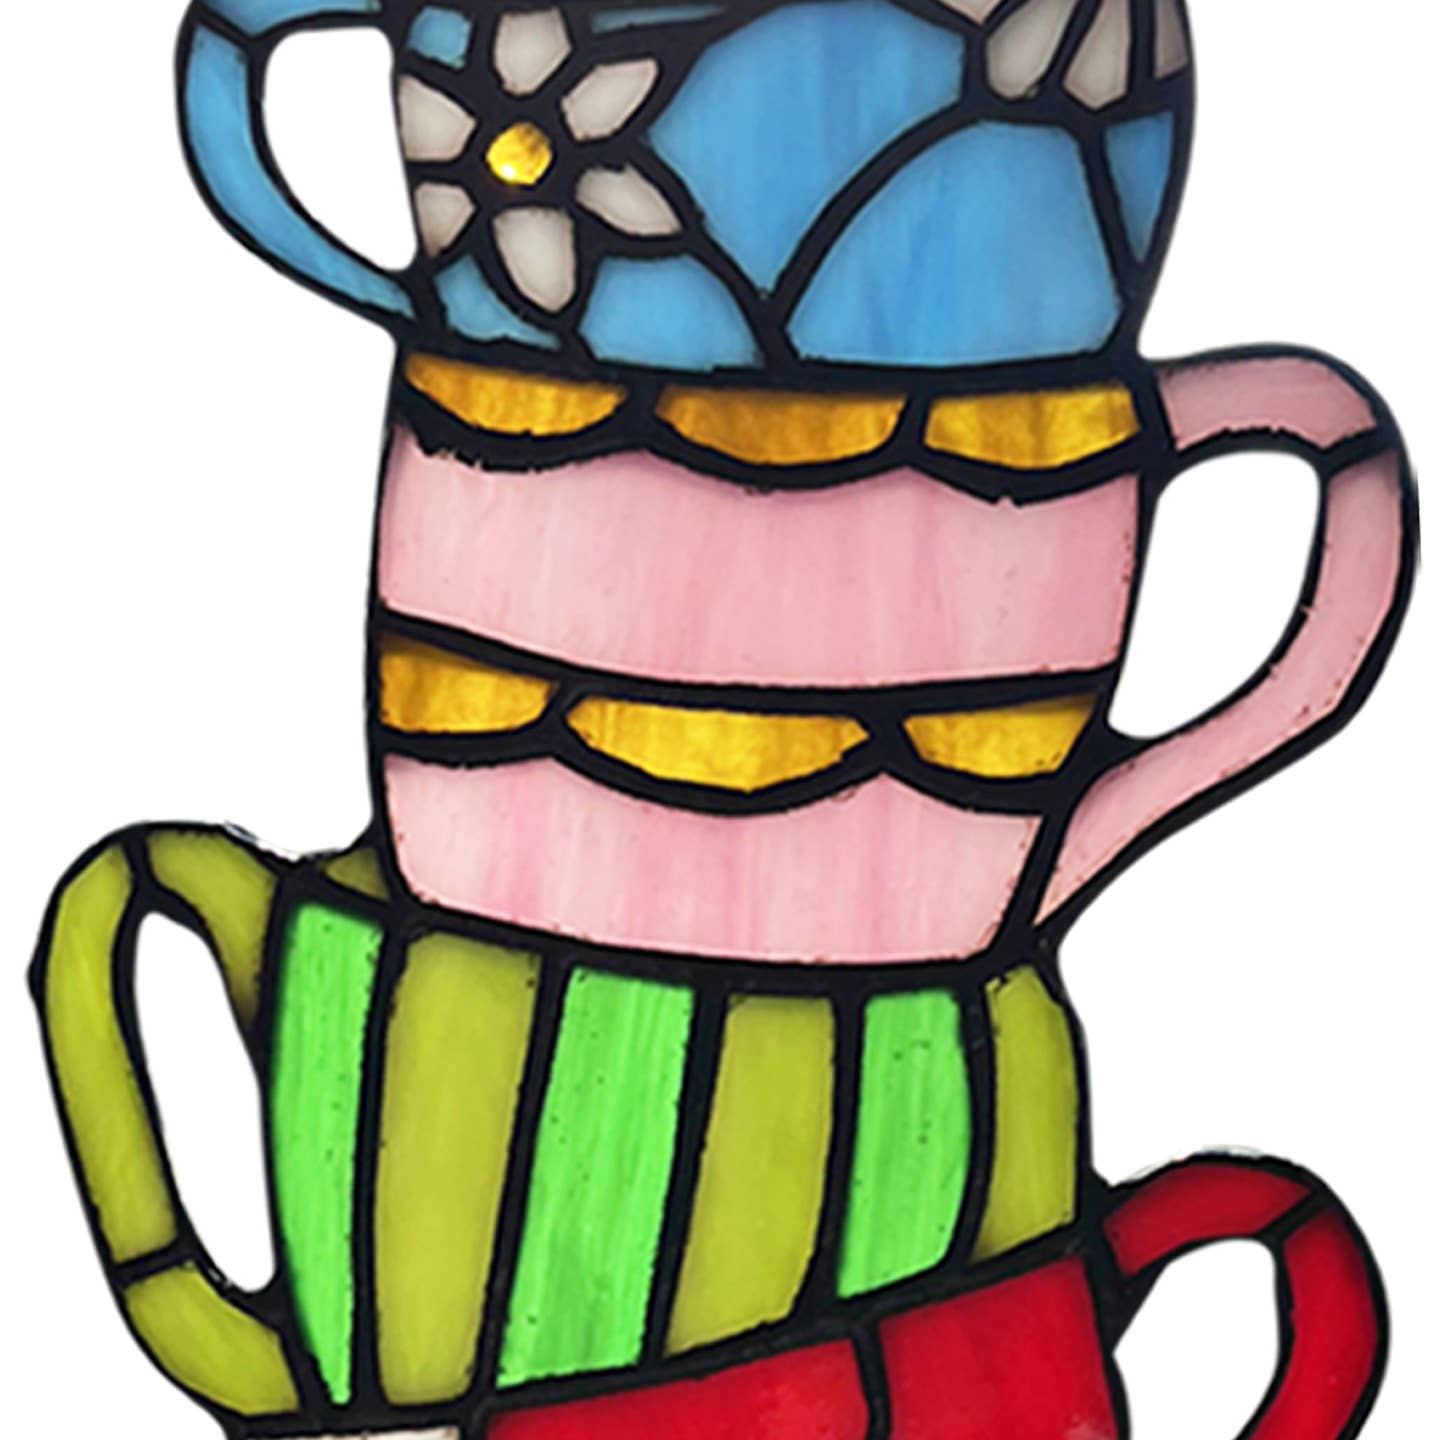 Colorful Stacked Teacups Stained Glass Window Panel 10 1/4 " H